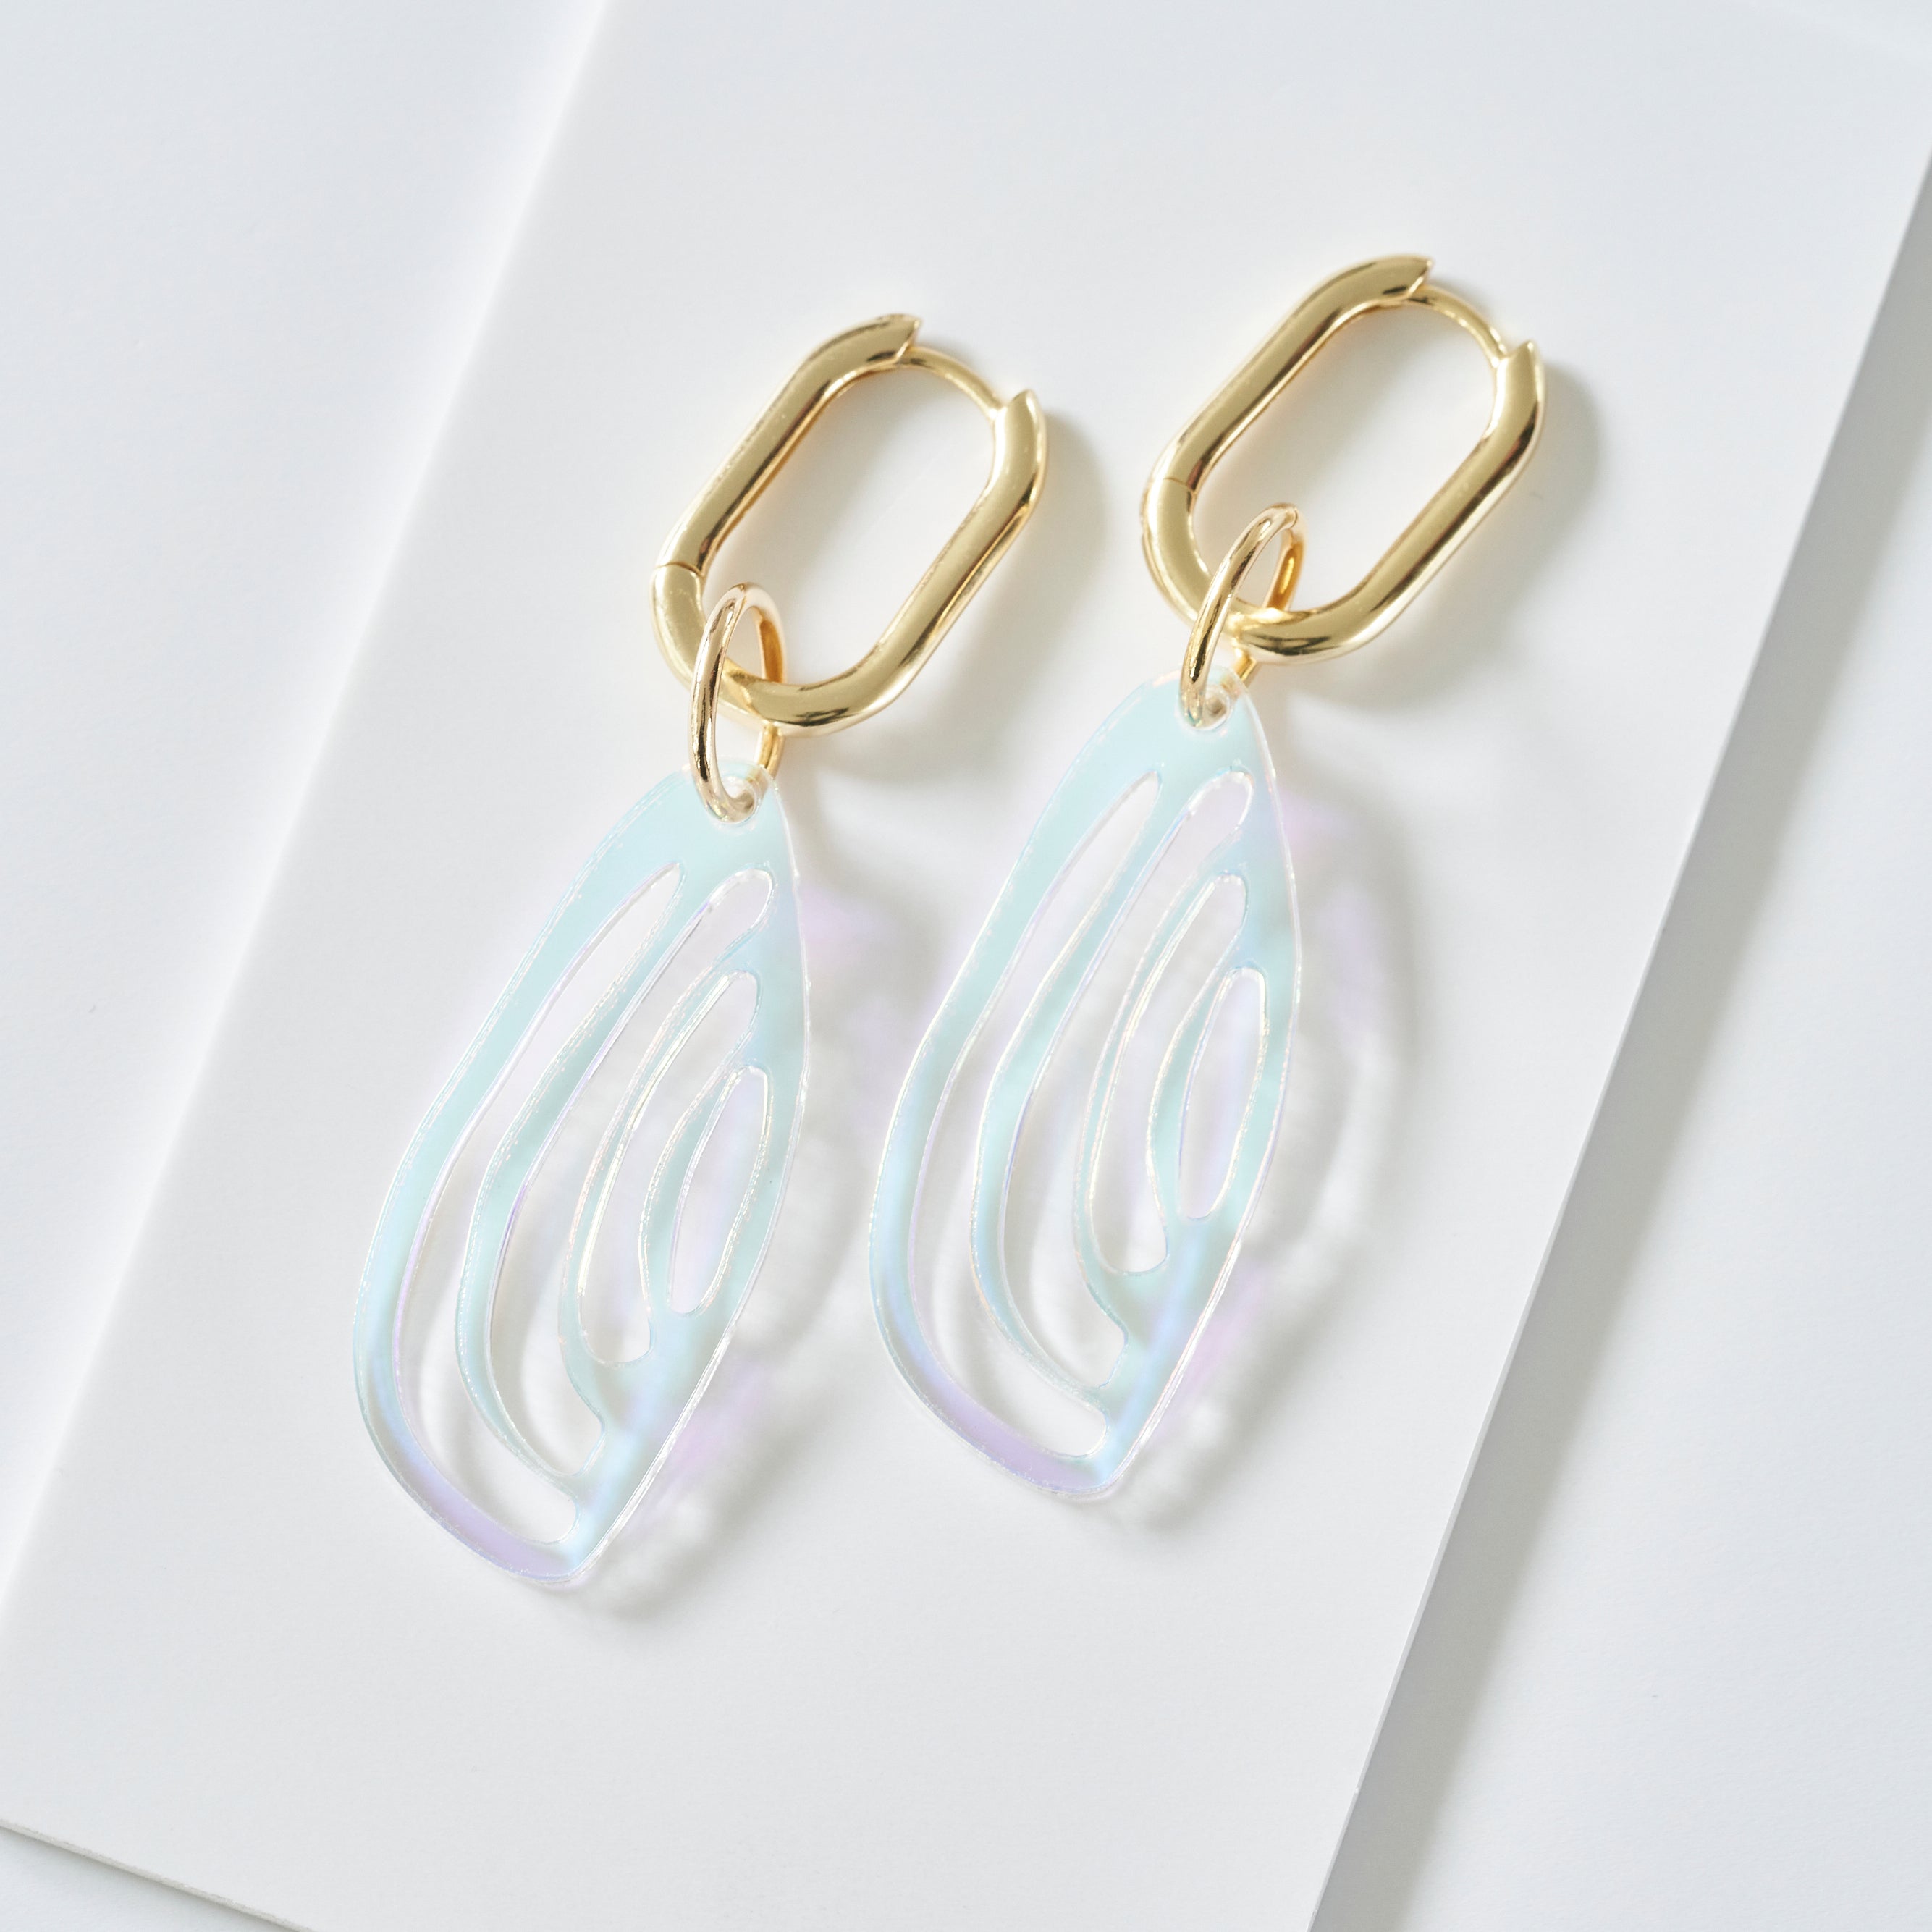 Kiana - iridescent with gold-plated hoops